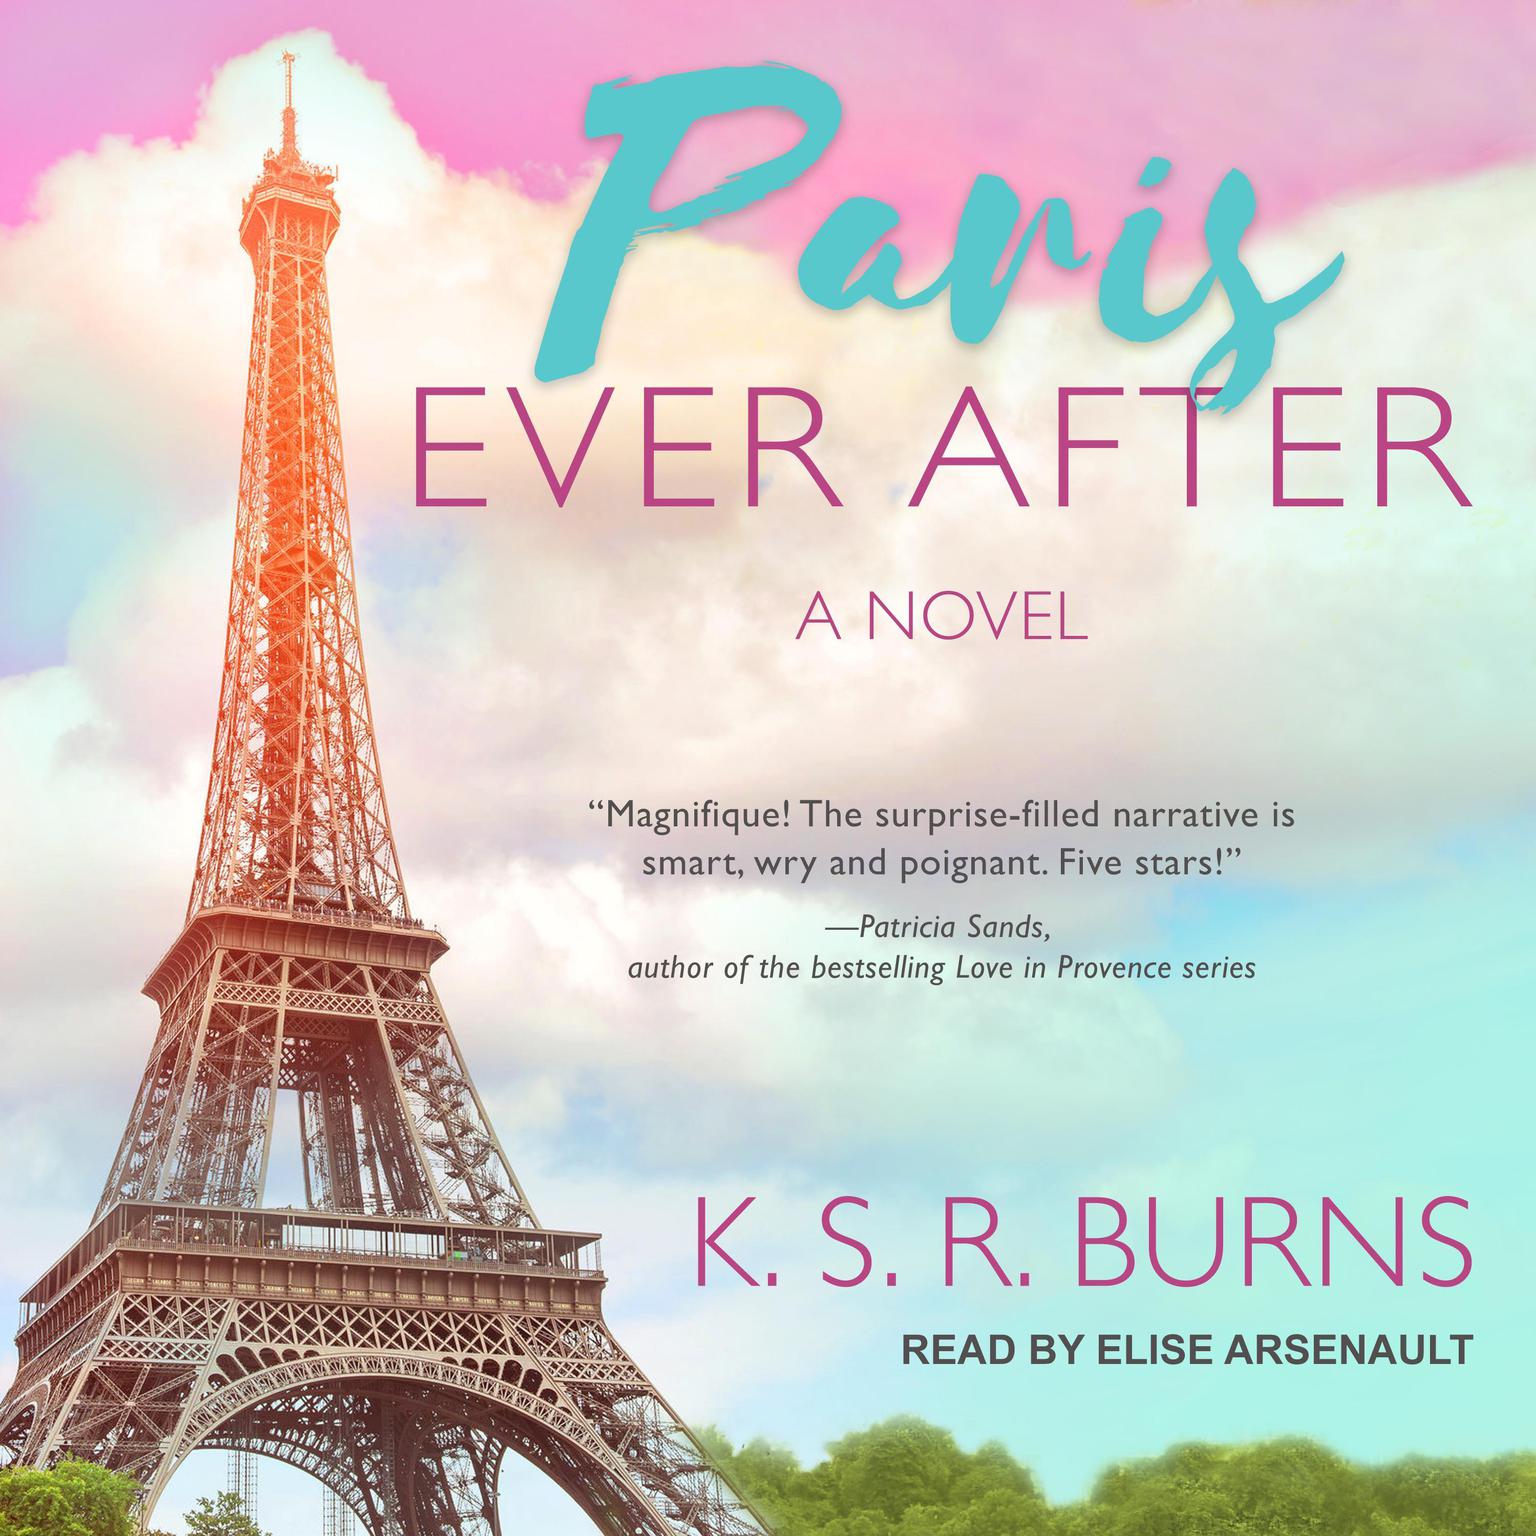 Paris Ever After Audiobook, by K. S. R. Burns